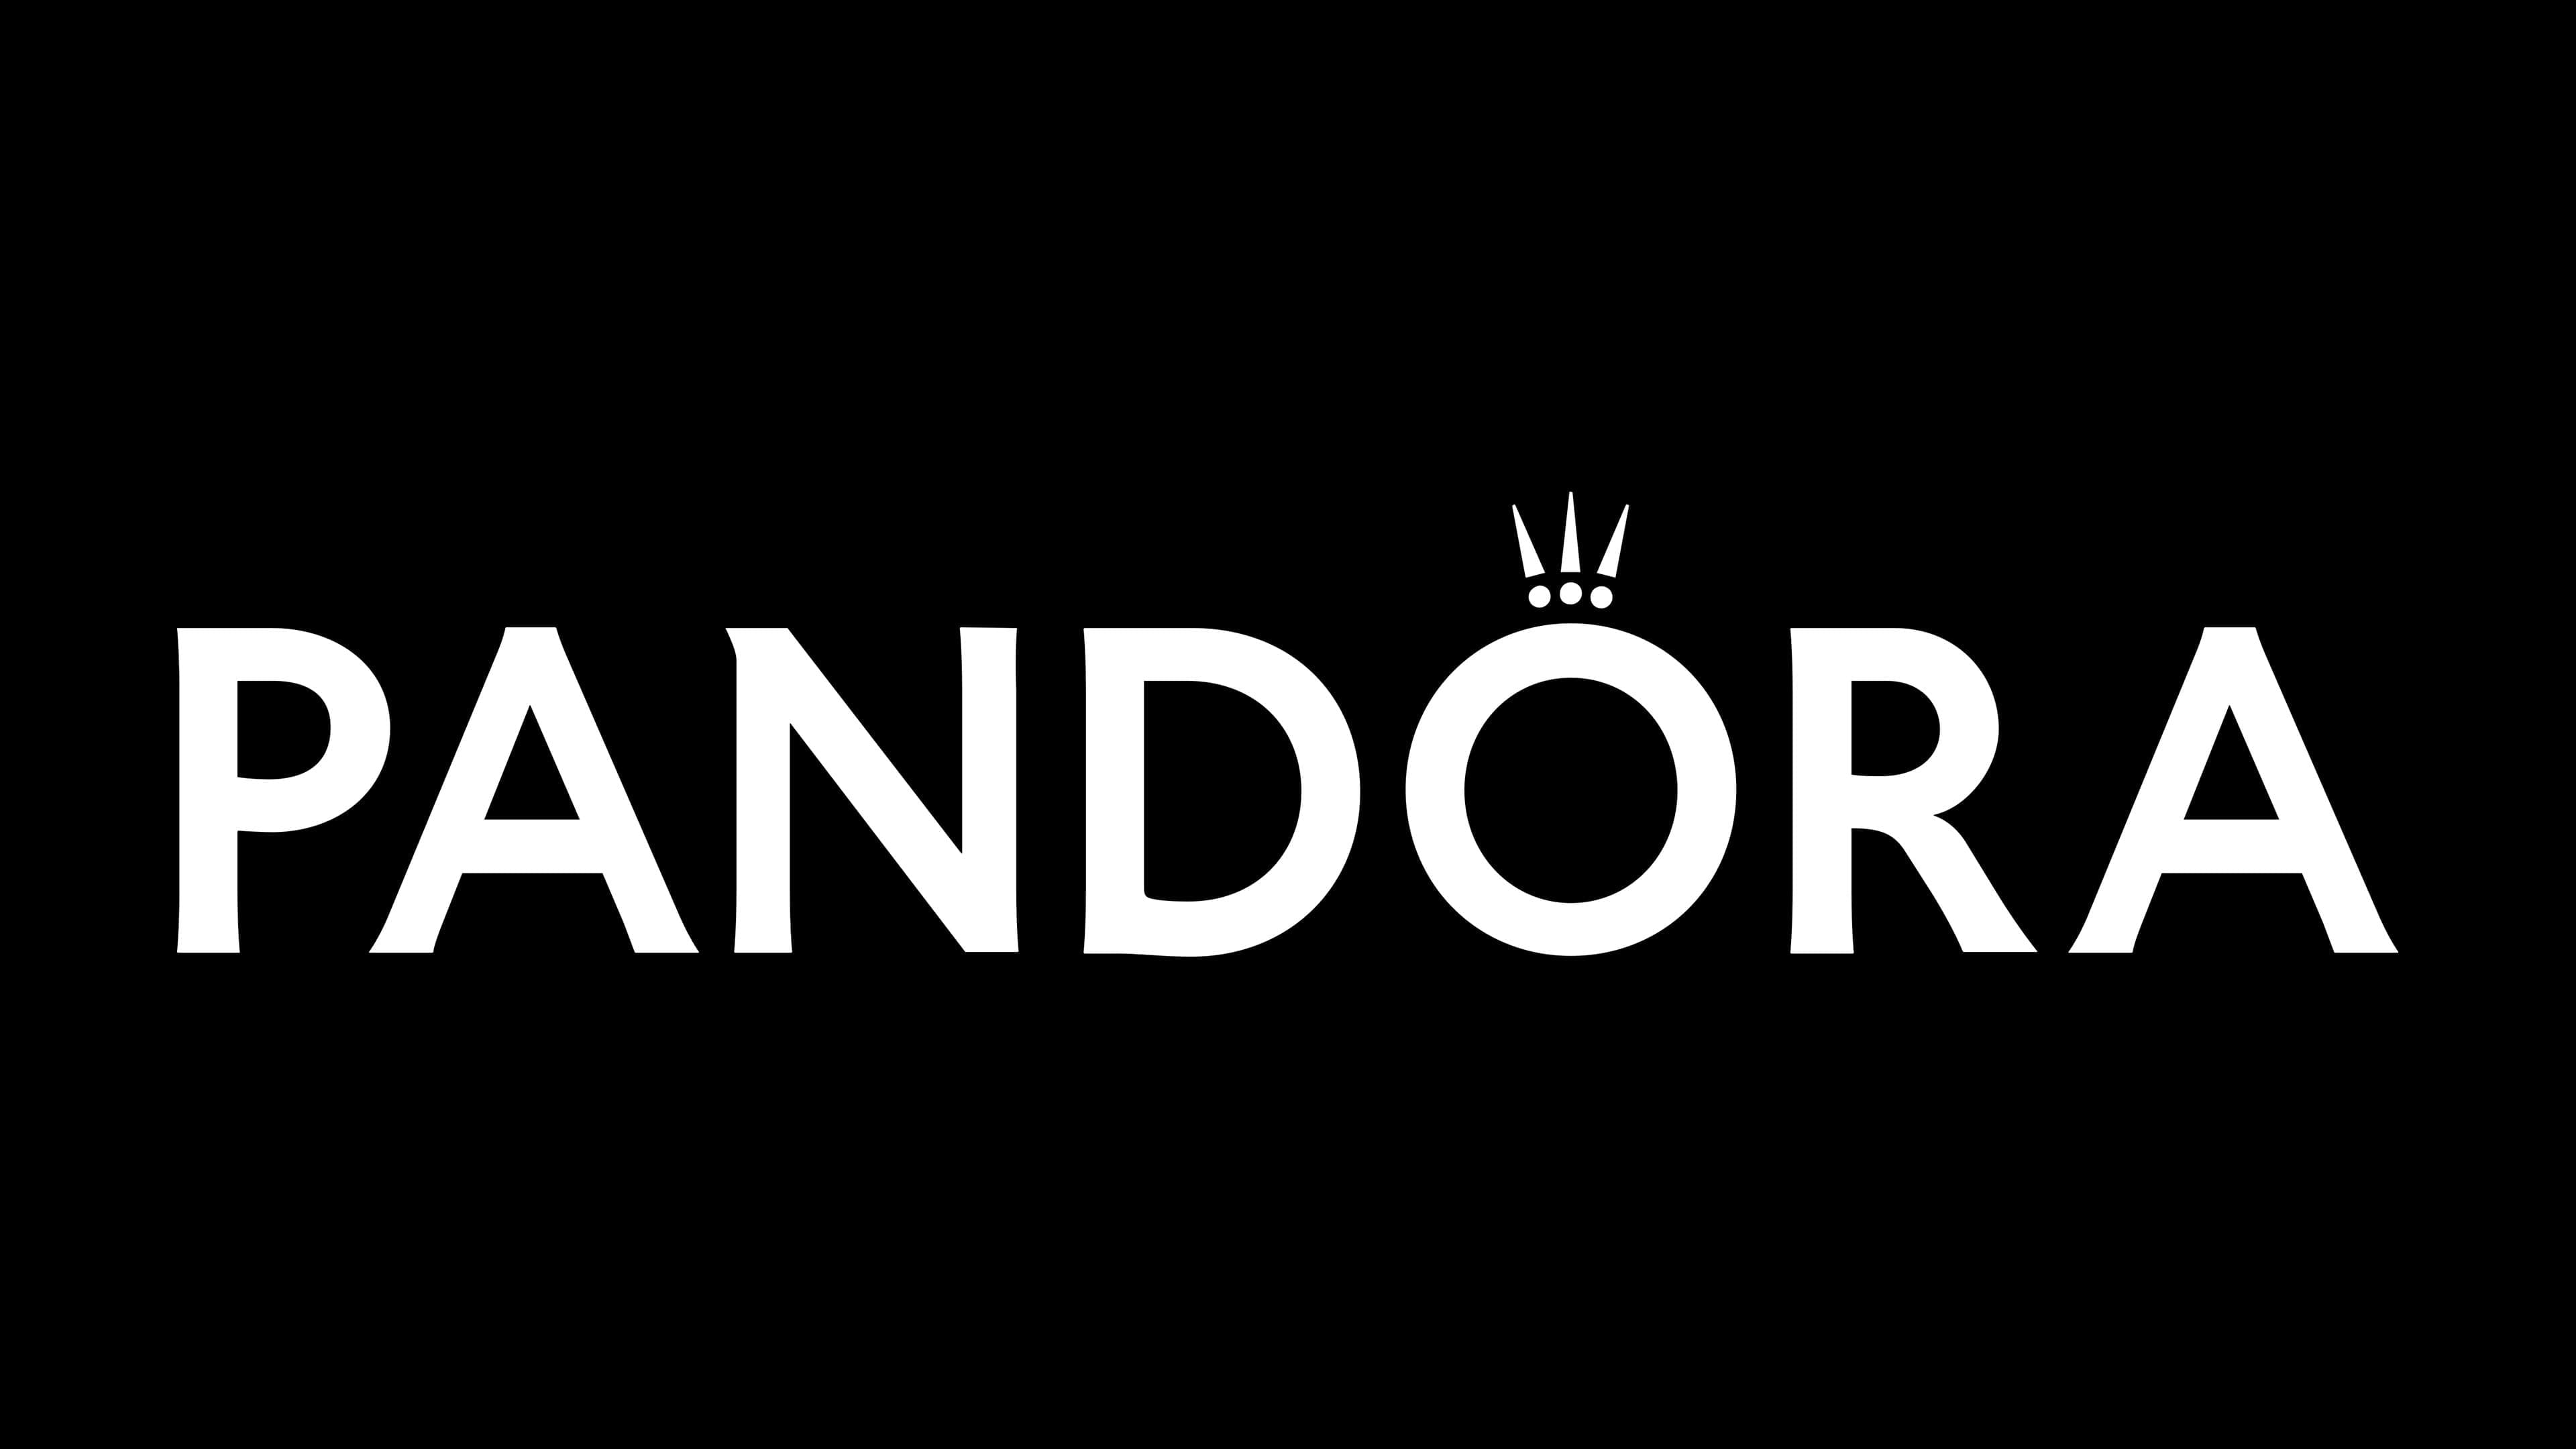 What Are The Benefits Pandora?